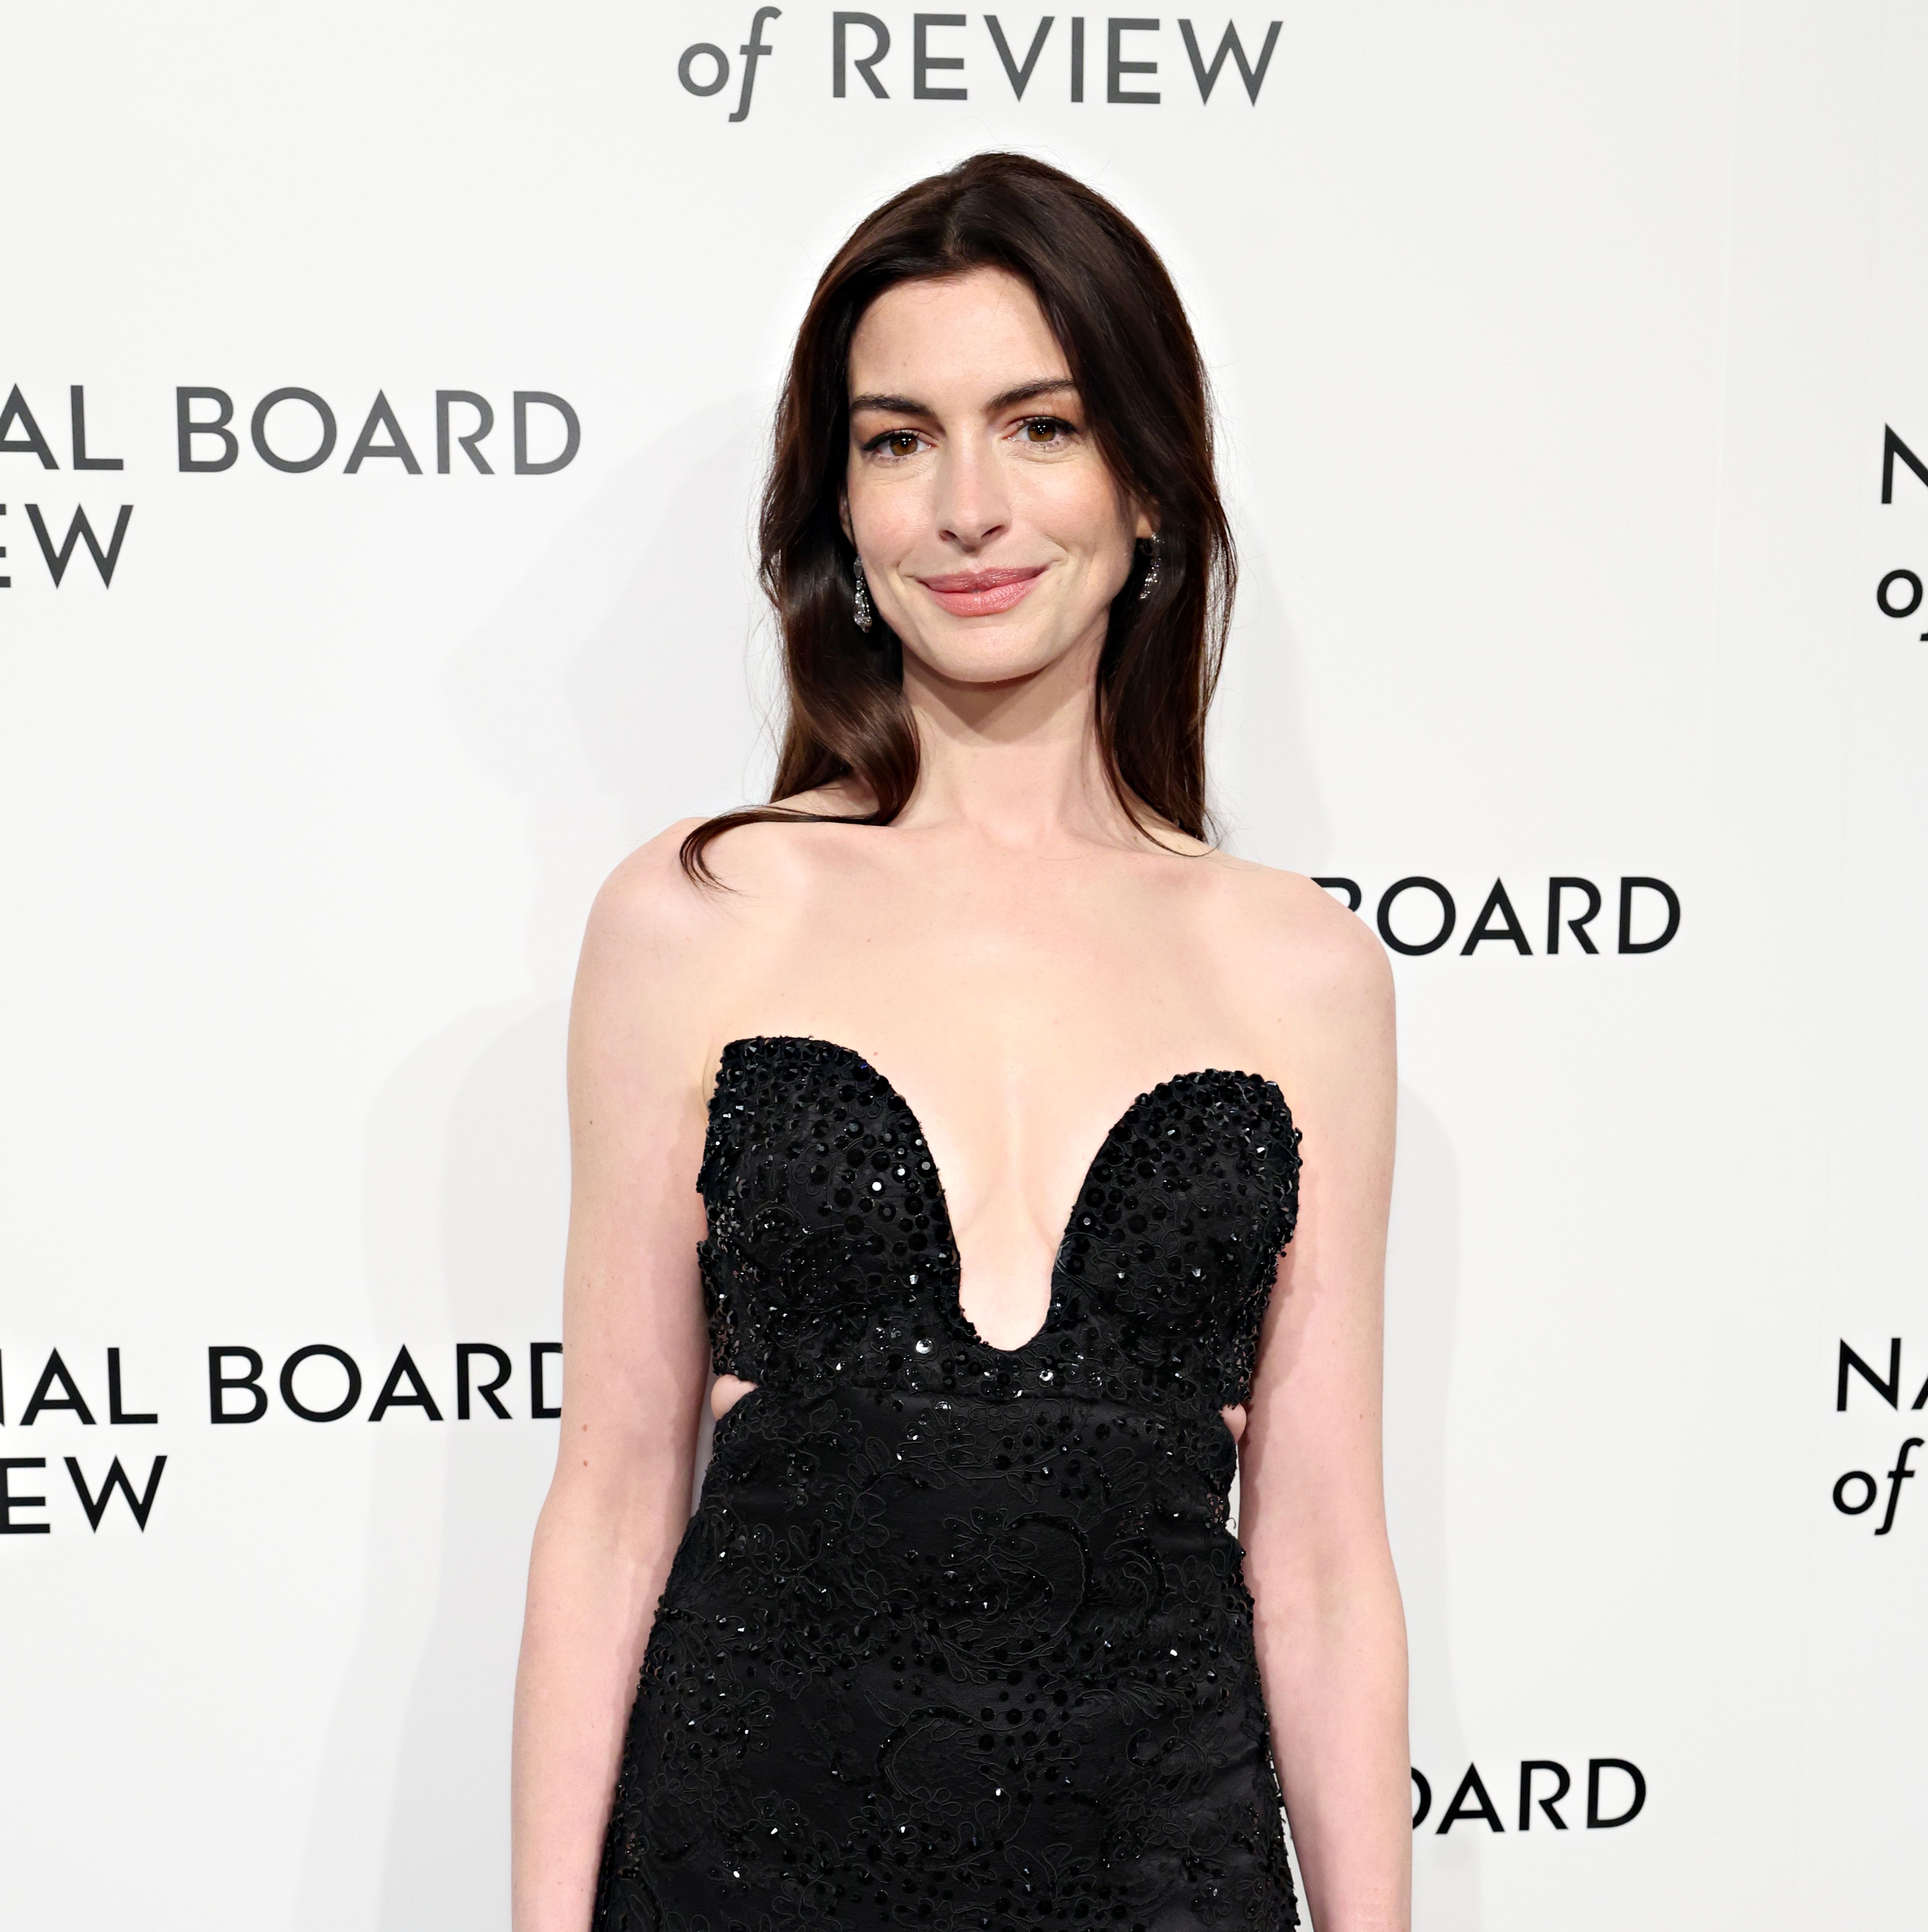 Anne Hathaway Debuts a New Micro-Length Fringe Haircut